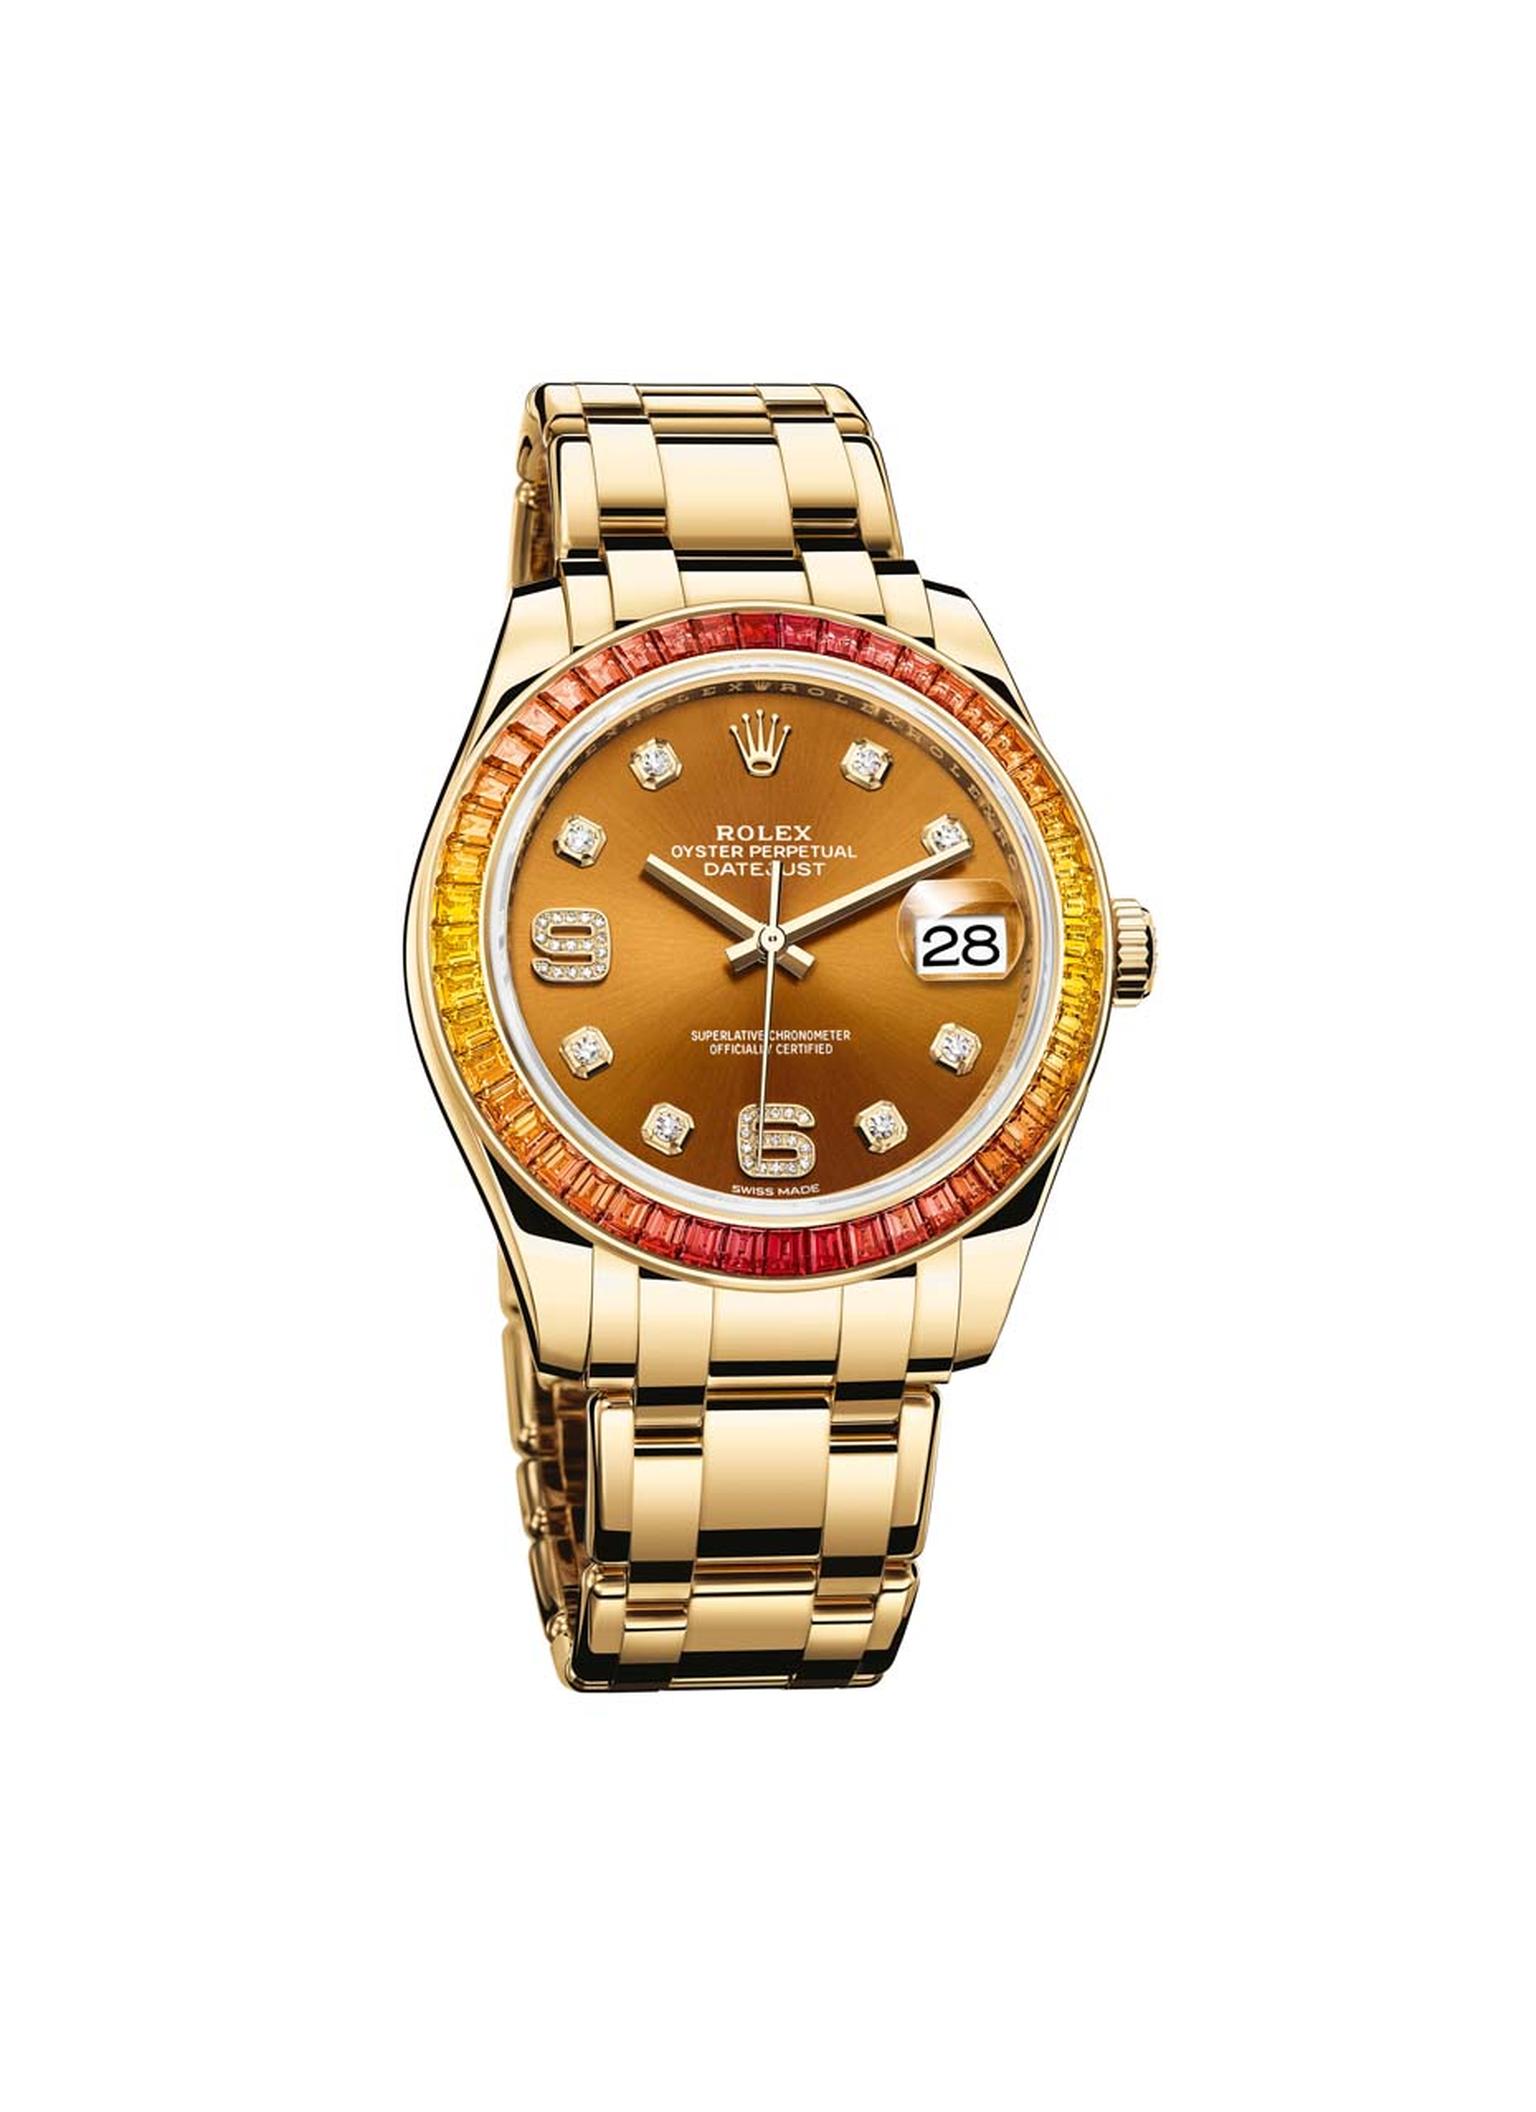 Mens watches_One watch fits all_Rolex_Datejust Pearlmaster 39mm Gold.jpg